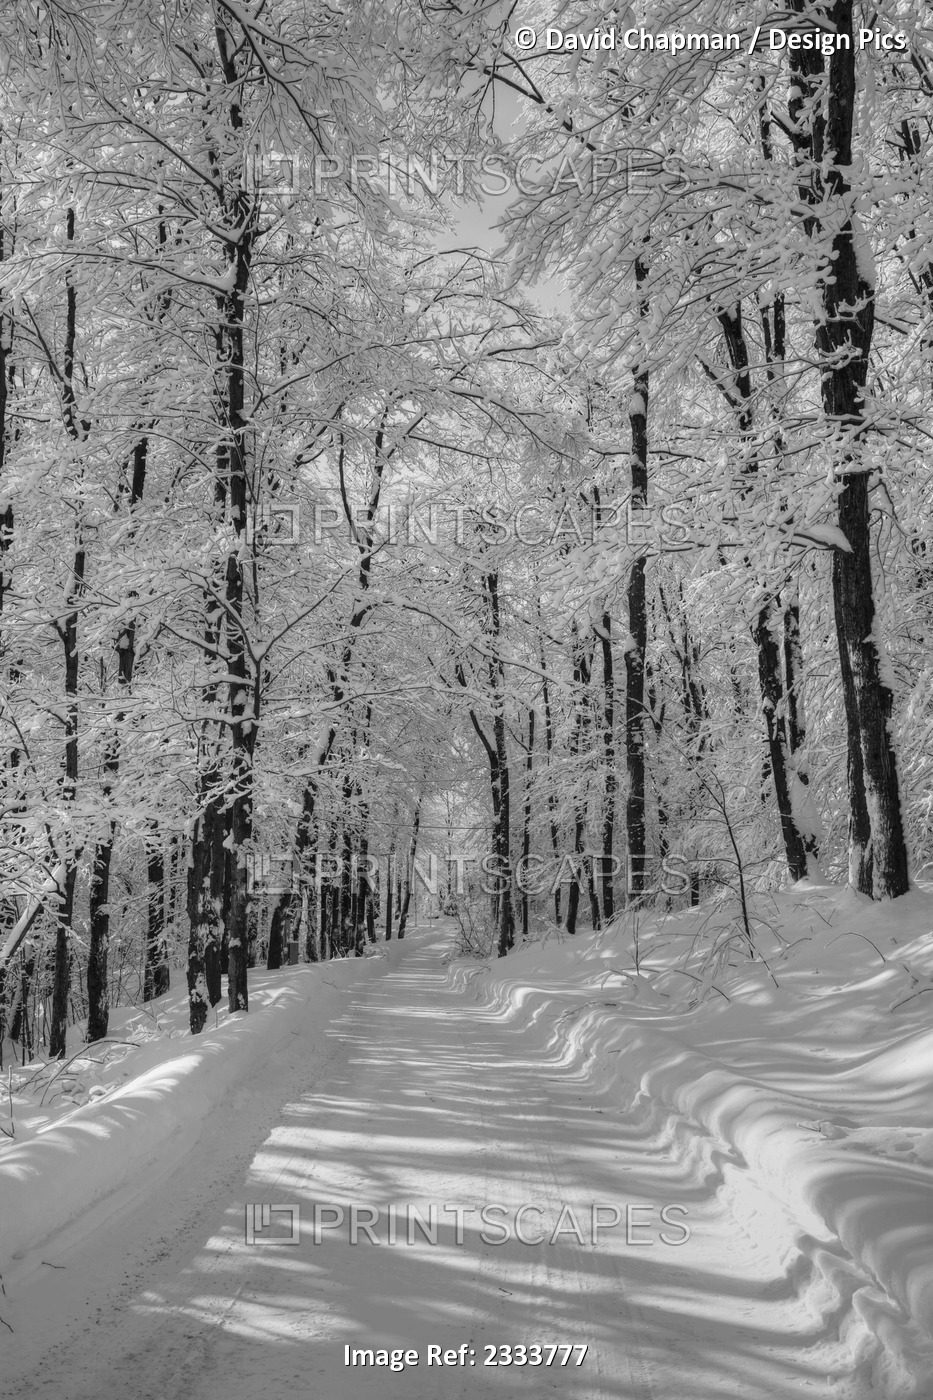 A snow covered road in winter; Iron Hill, Quebec, Canada